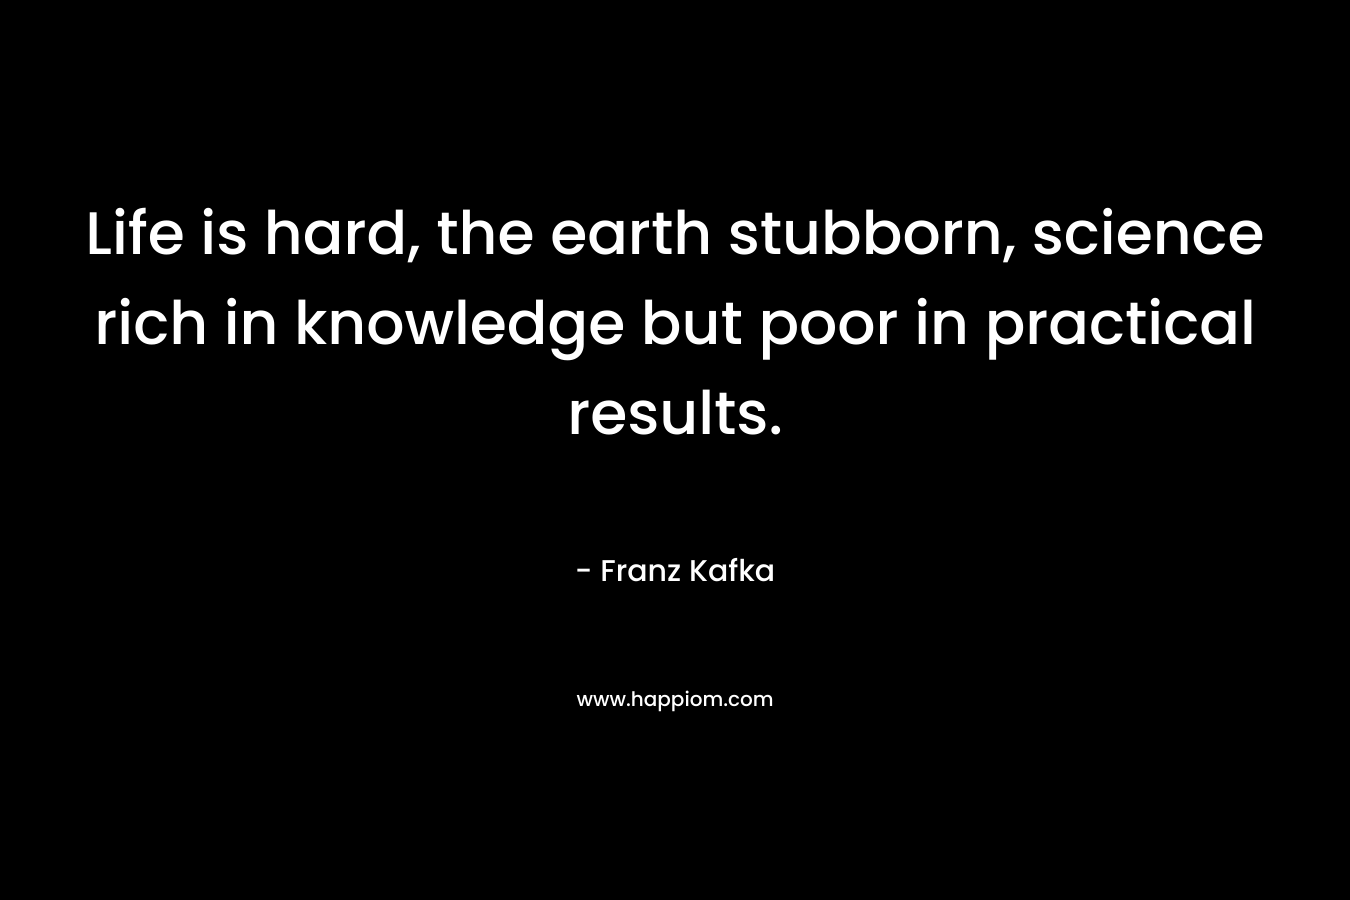 Life is hard, the earth stubborn, science rich in knowledge but poor in practical results.